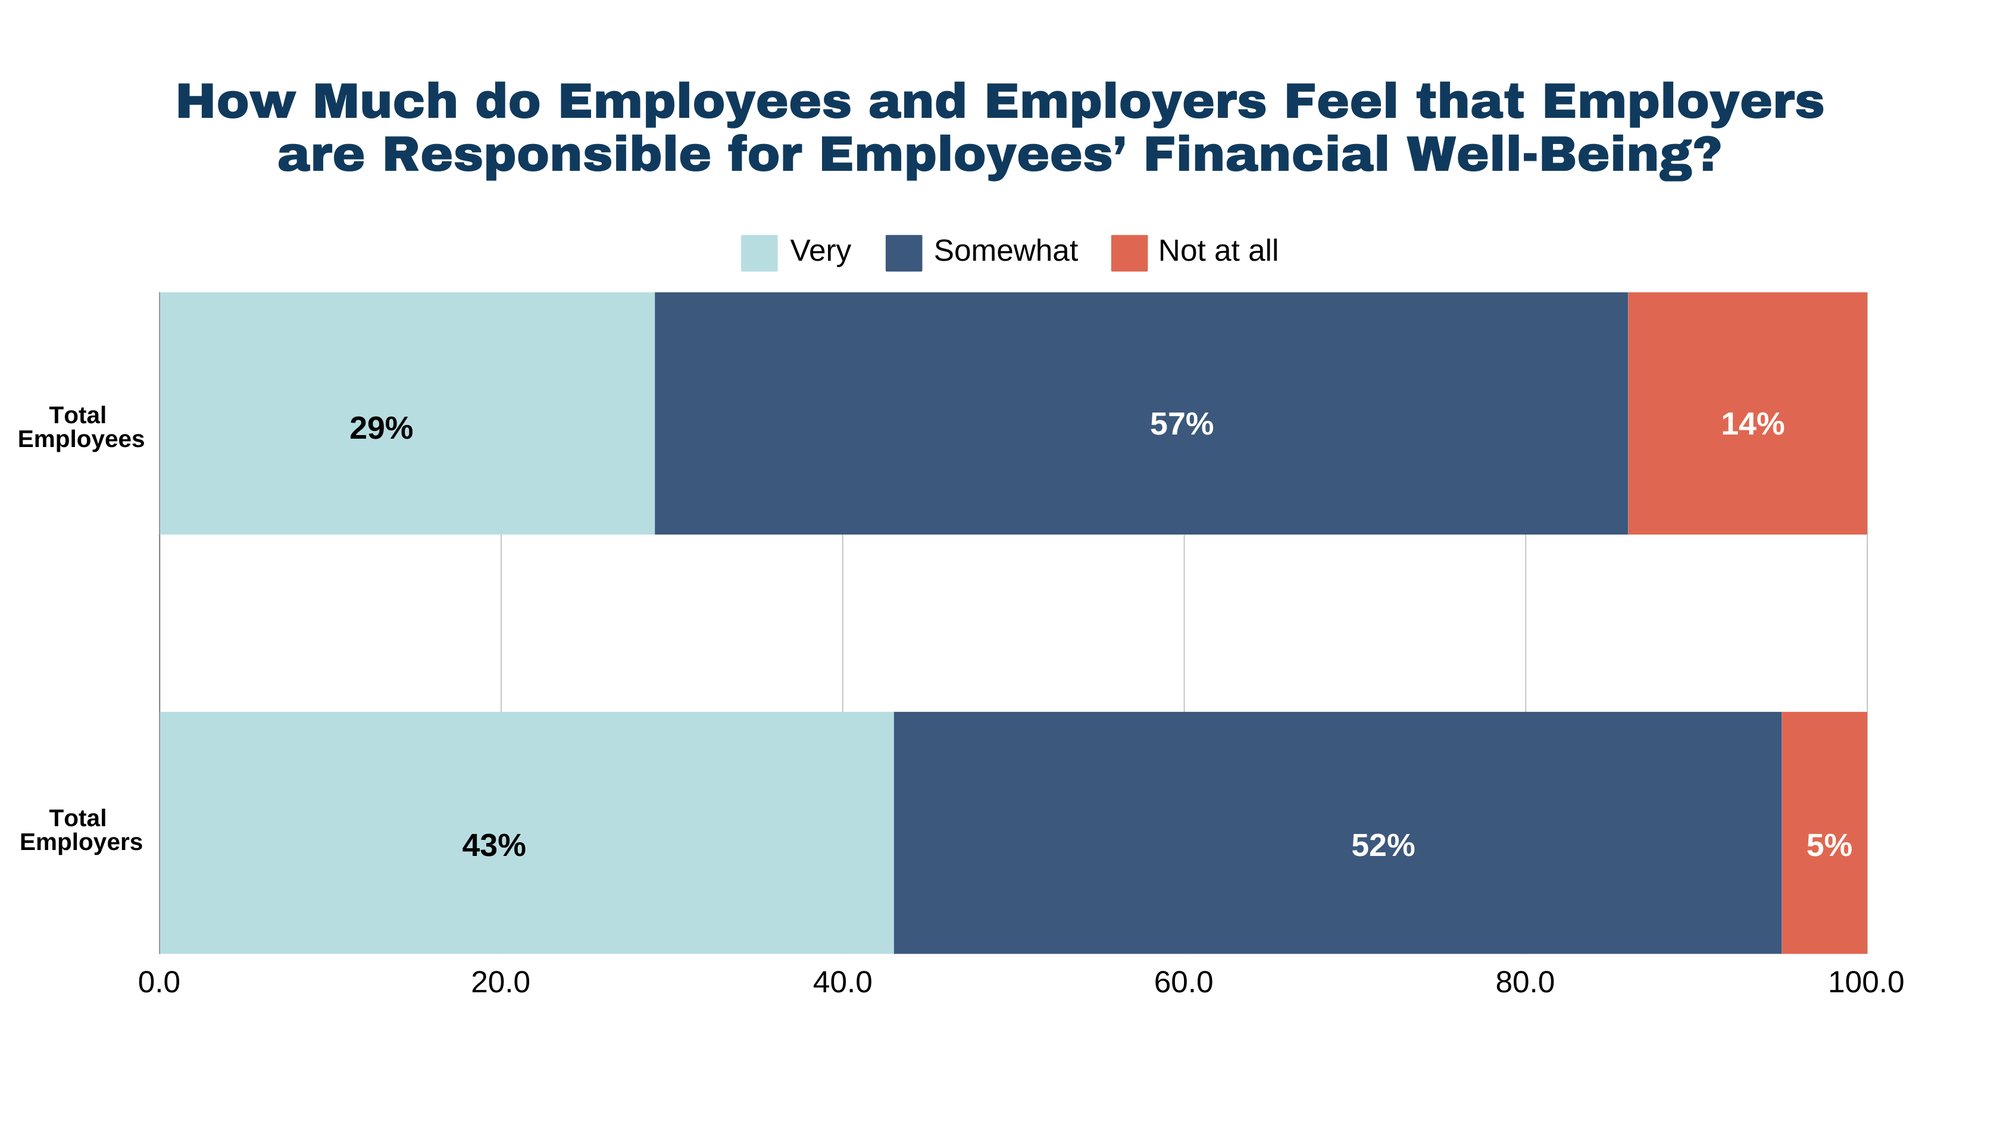 How Much do Employees and Employers Feel that Employers are Responsible for Employees’ Financial Well-Being